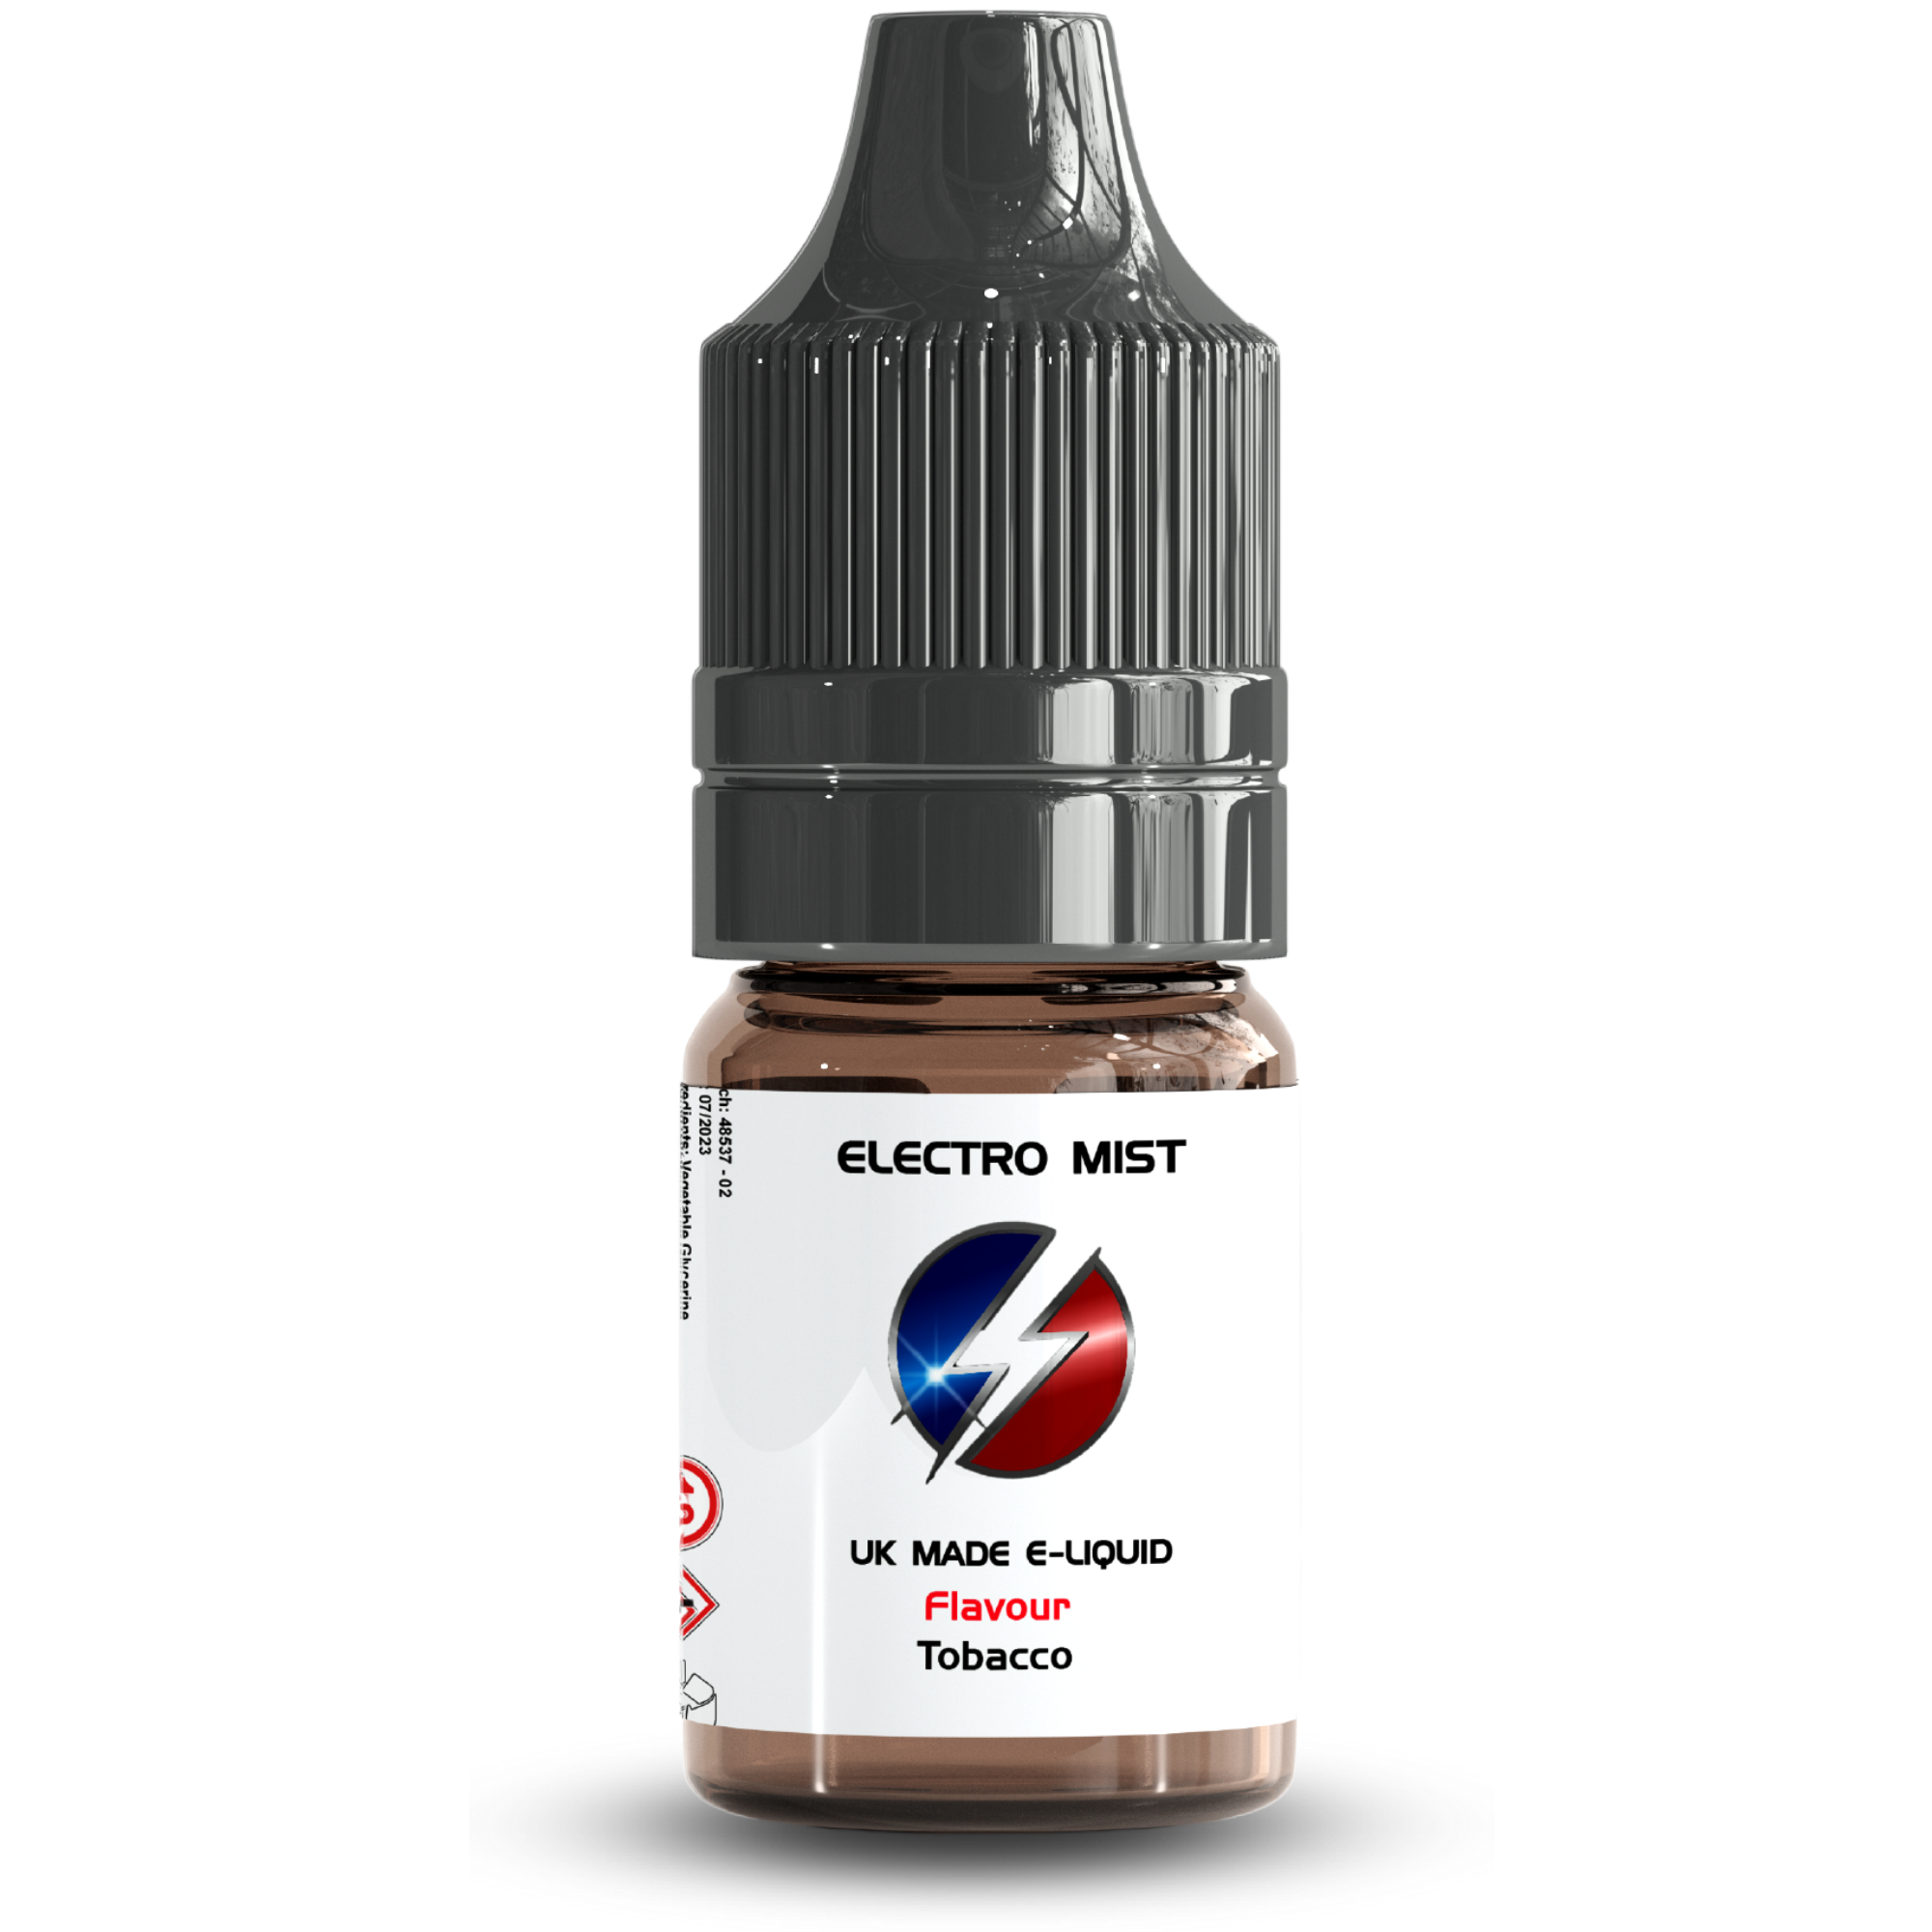 Electromist, the e-liquid brand you can trust. Get your taste buds ready for a flavour sensation, Tobacco. Nicotine Content: 3mg/6mg/12mg. Products may contain nicotine. For over 18s Only ejuice, vape pen, eliquid, e cigarette, 10ml, vaping, cloud, PG, VG, 60/40, vape liquid, Flavour